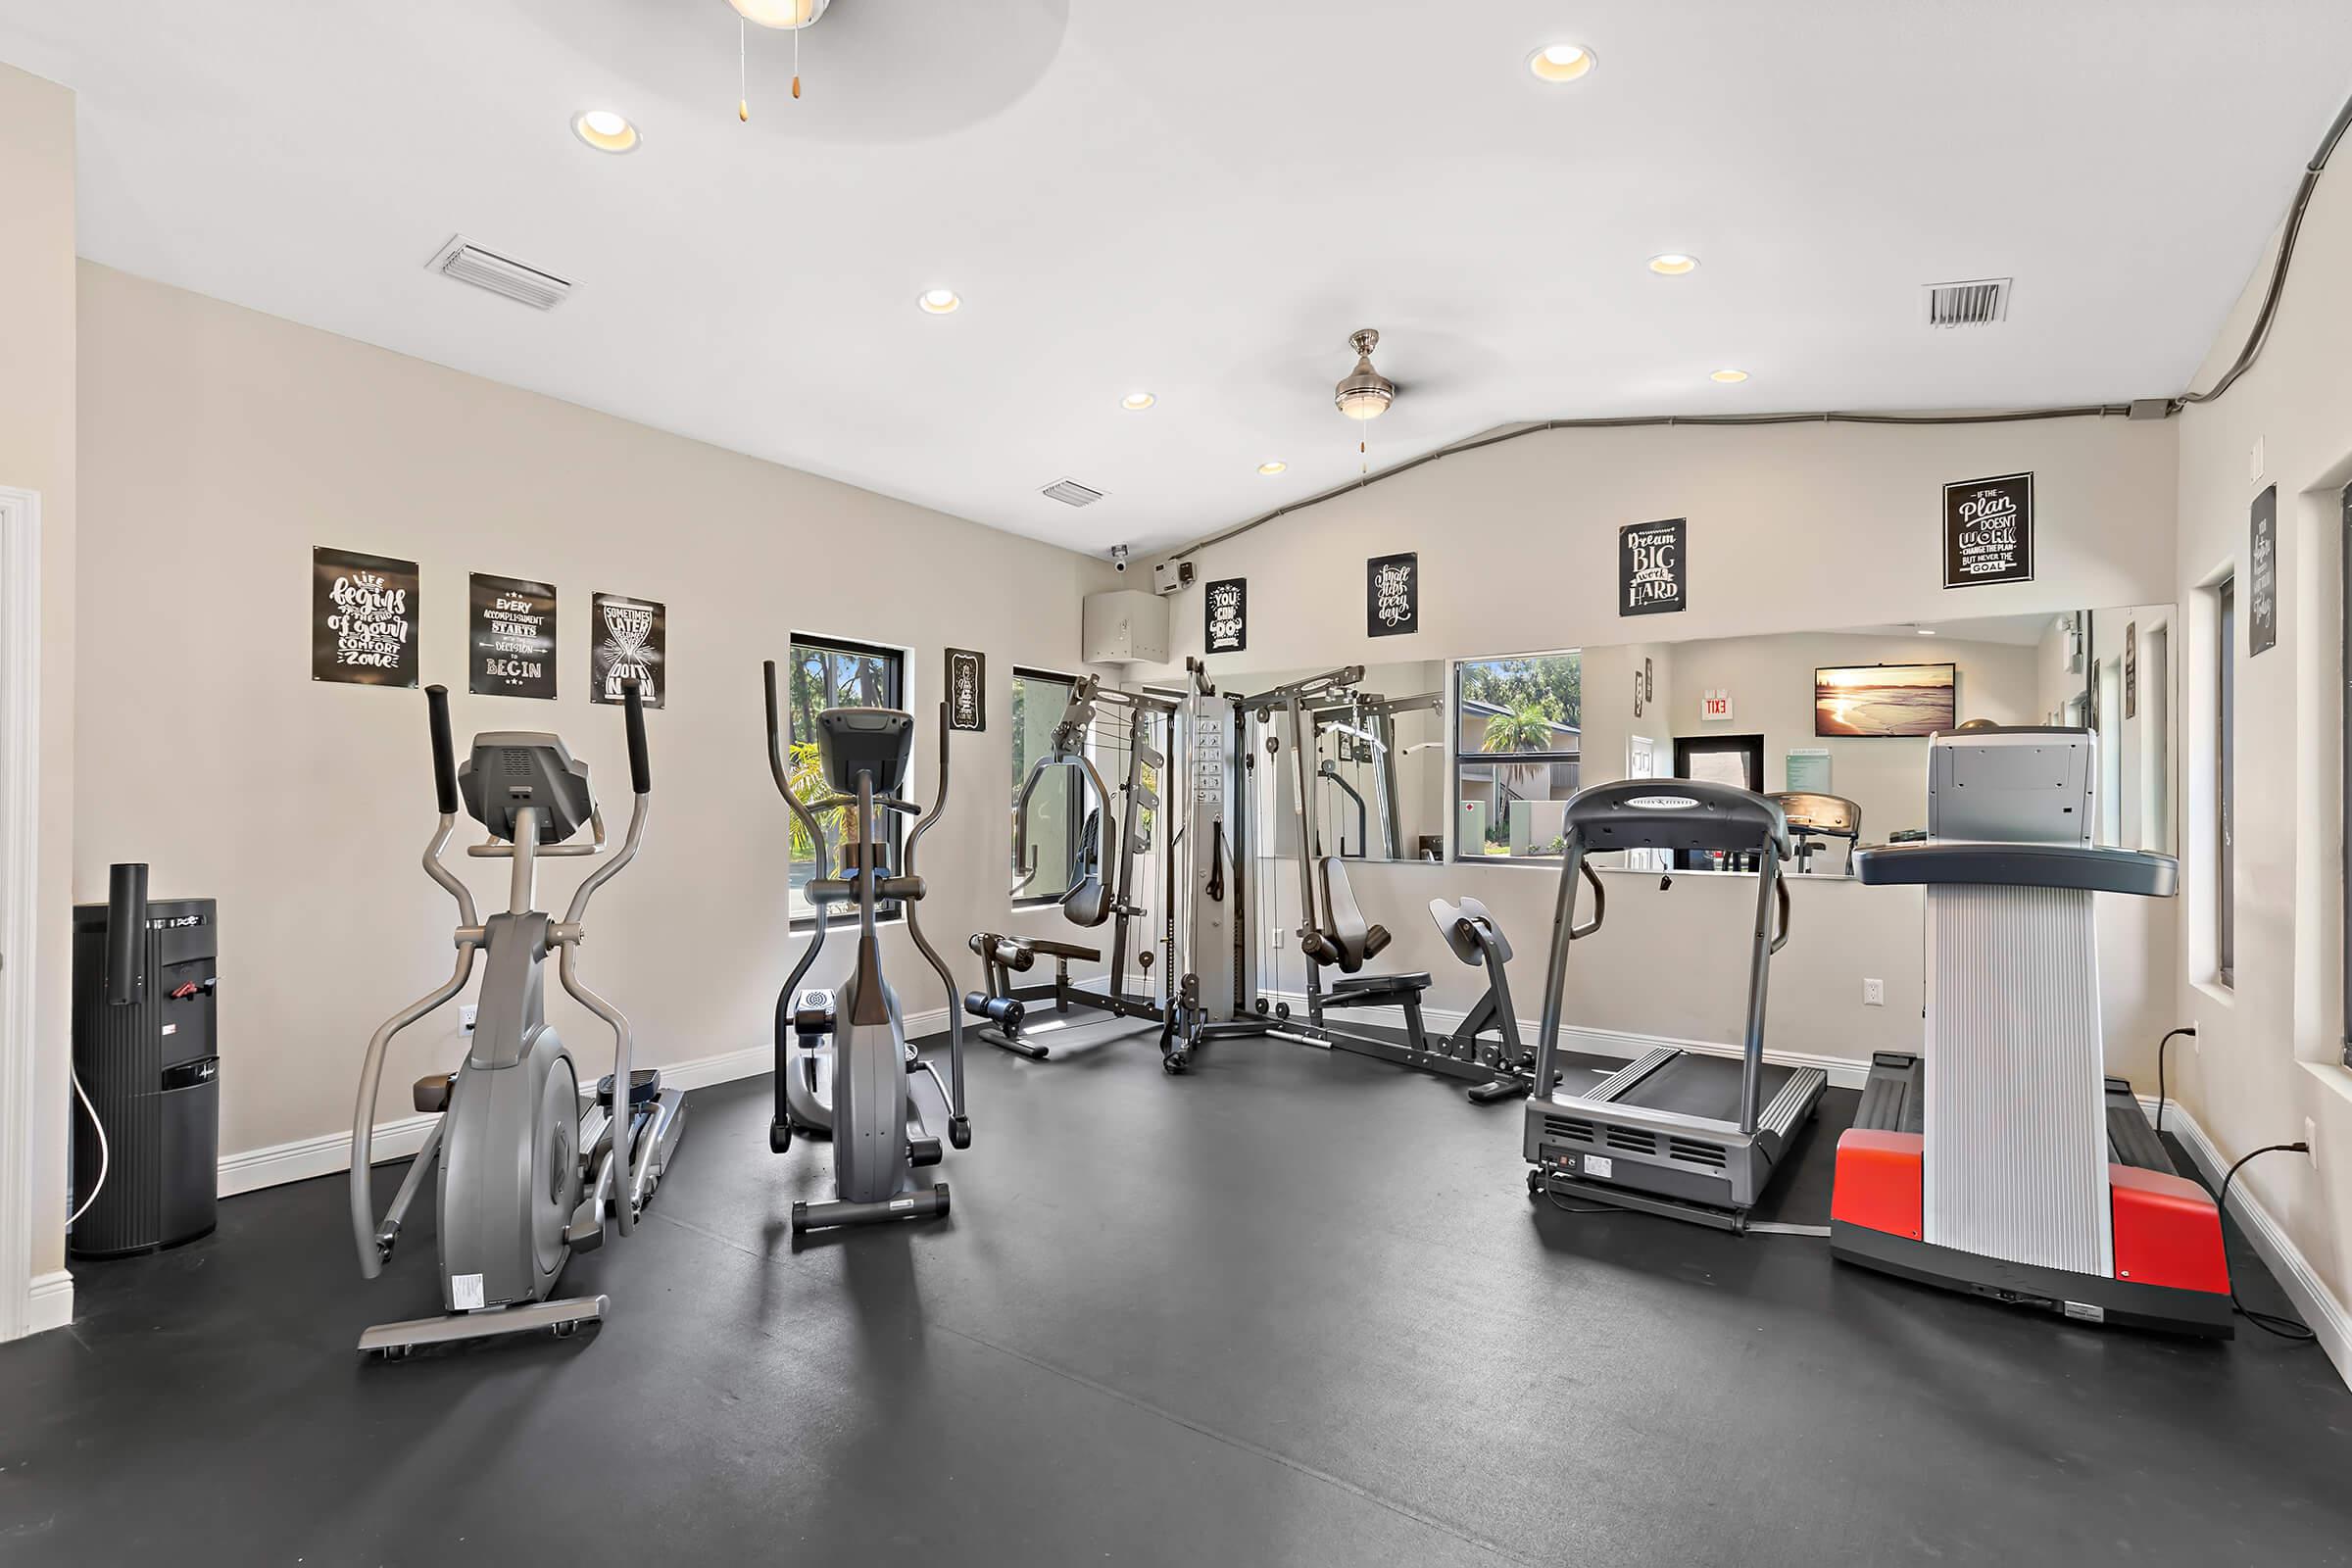 Enjoy Our-state-of-the-art Fitness Center At The Oasis at Bayside in Largo, FL